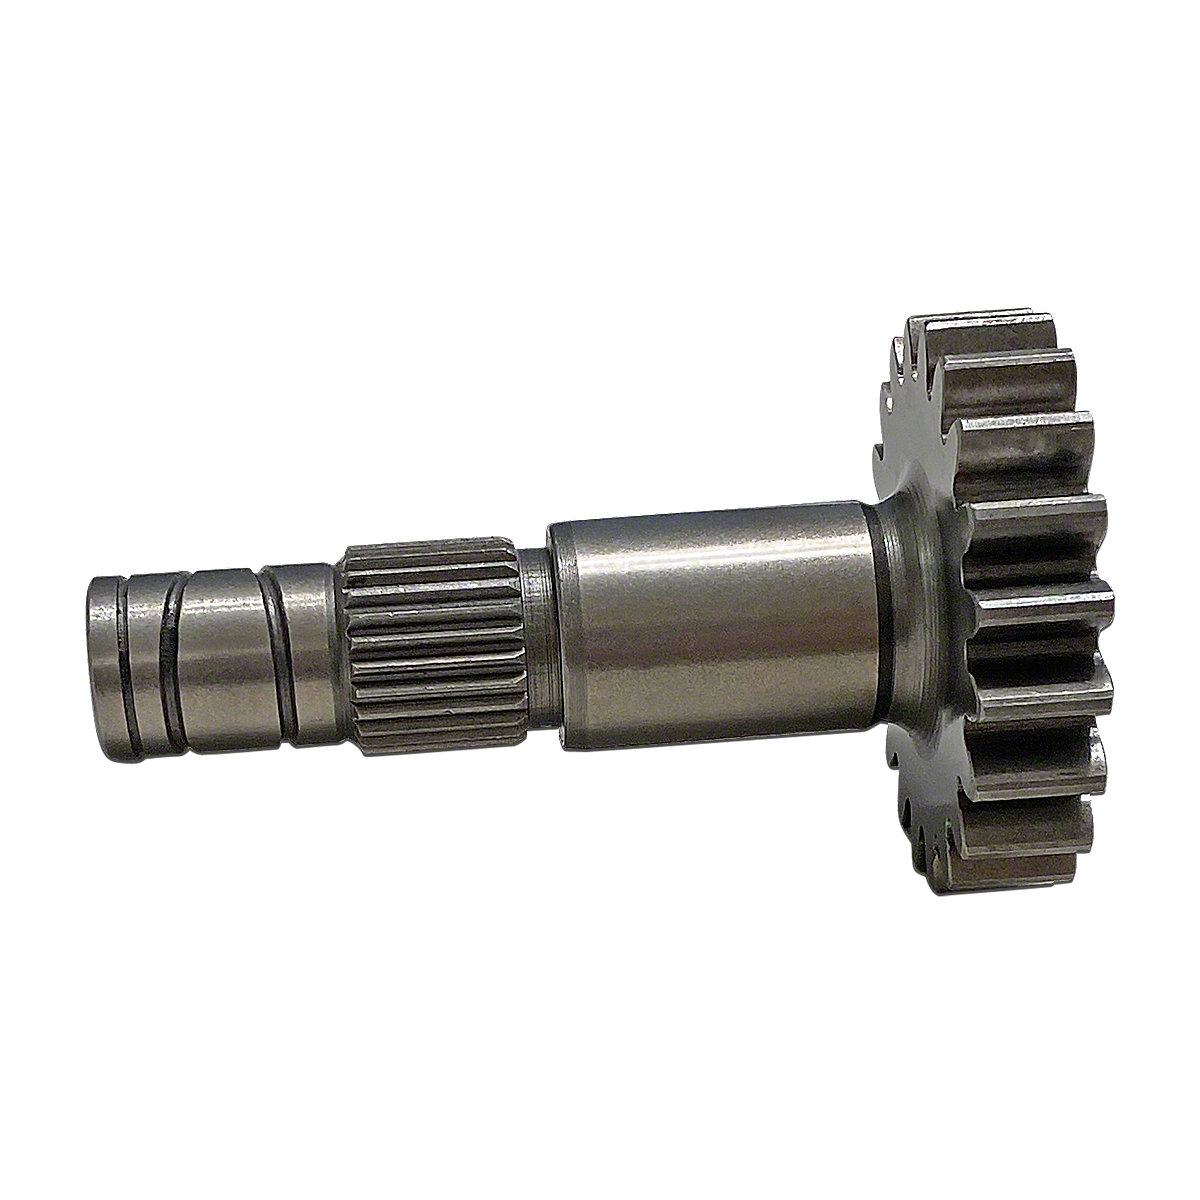 Transmission Reverse Shaft and Gear